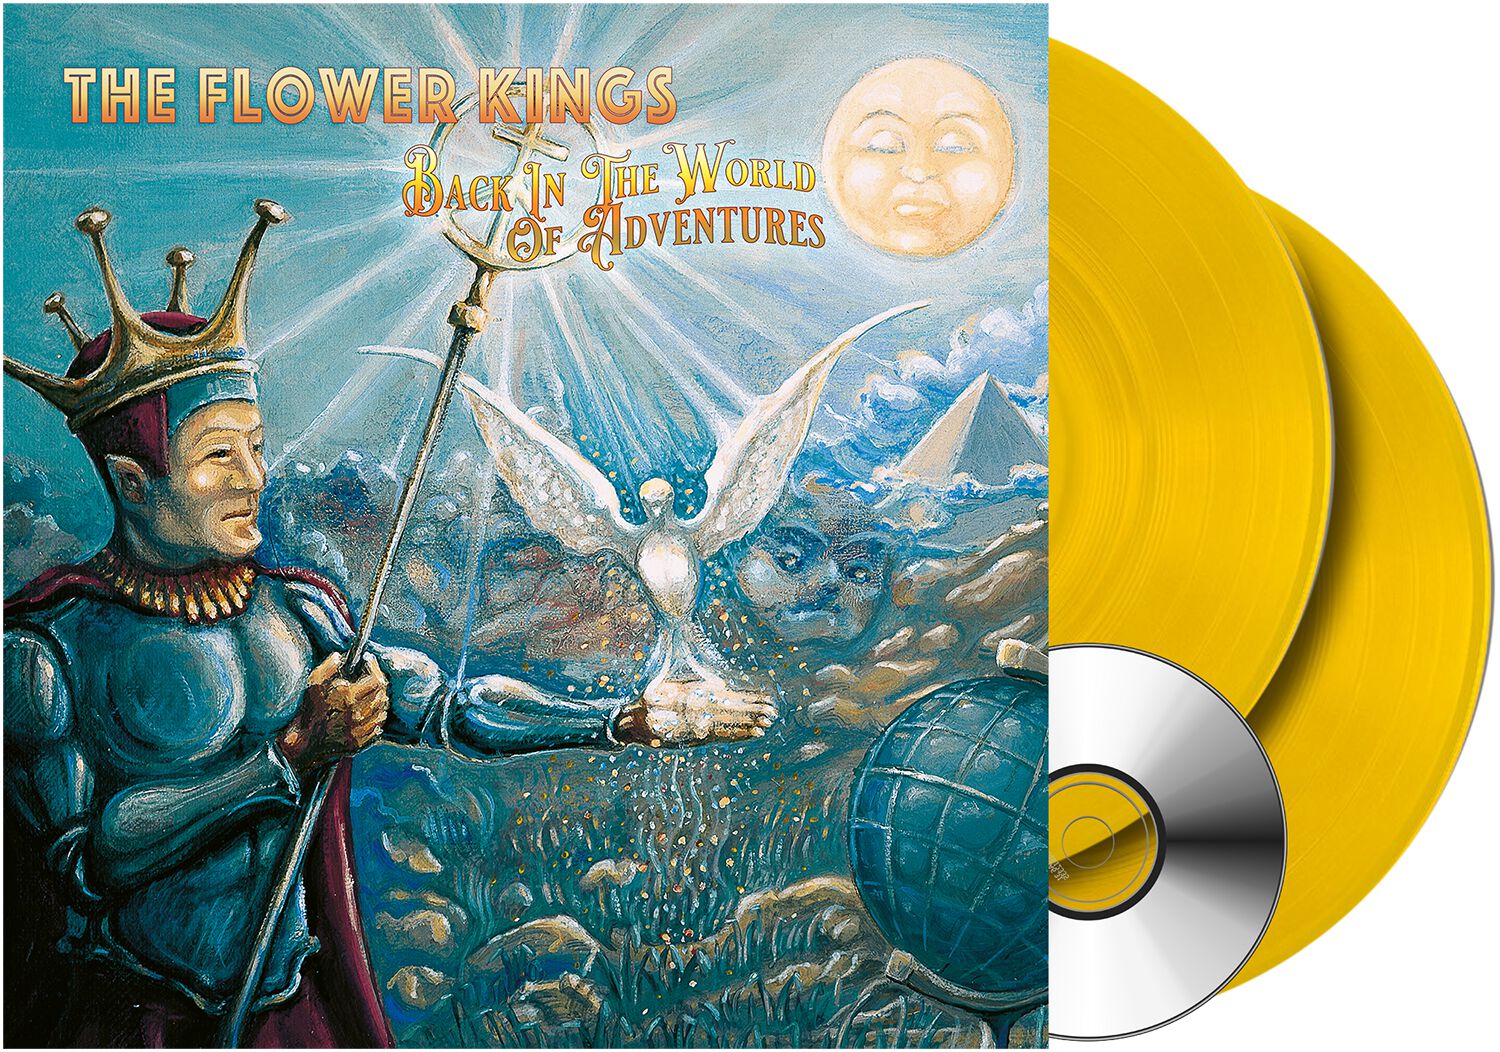 The Flower Kings Back in the world of adventures LP coloured